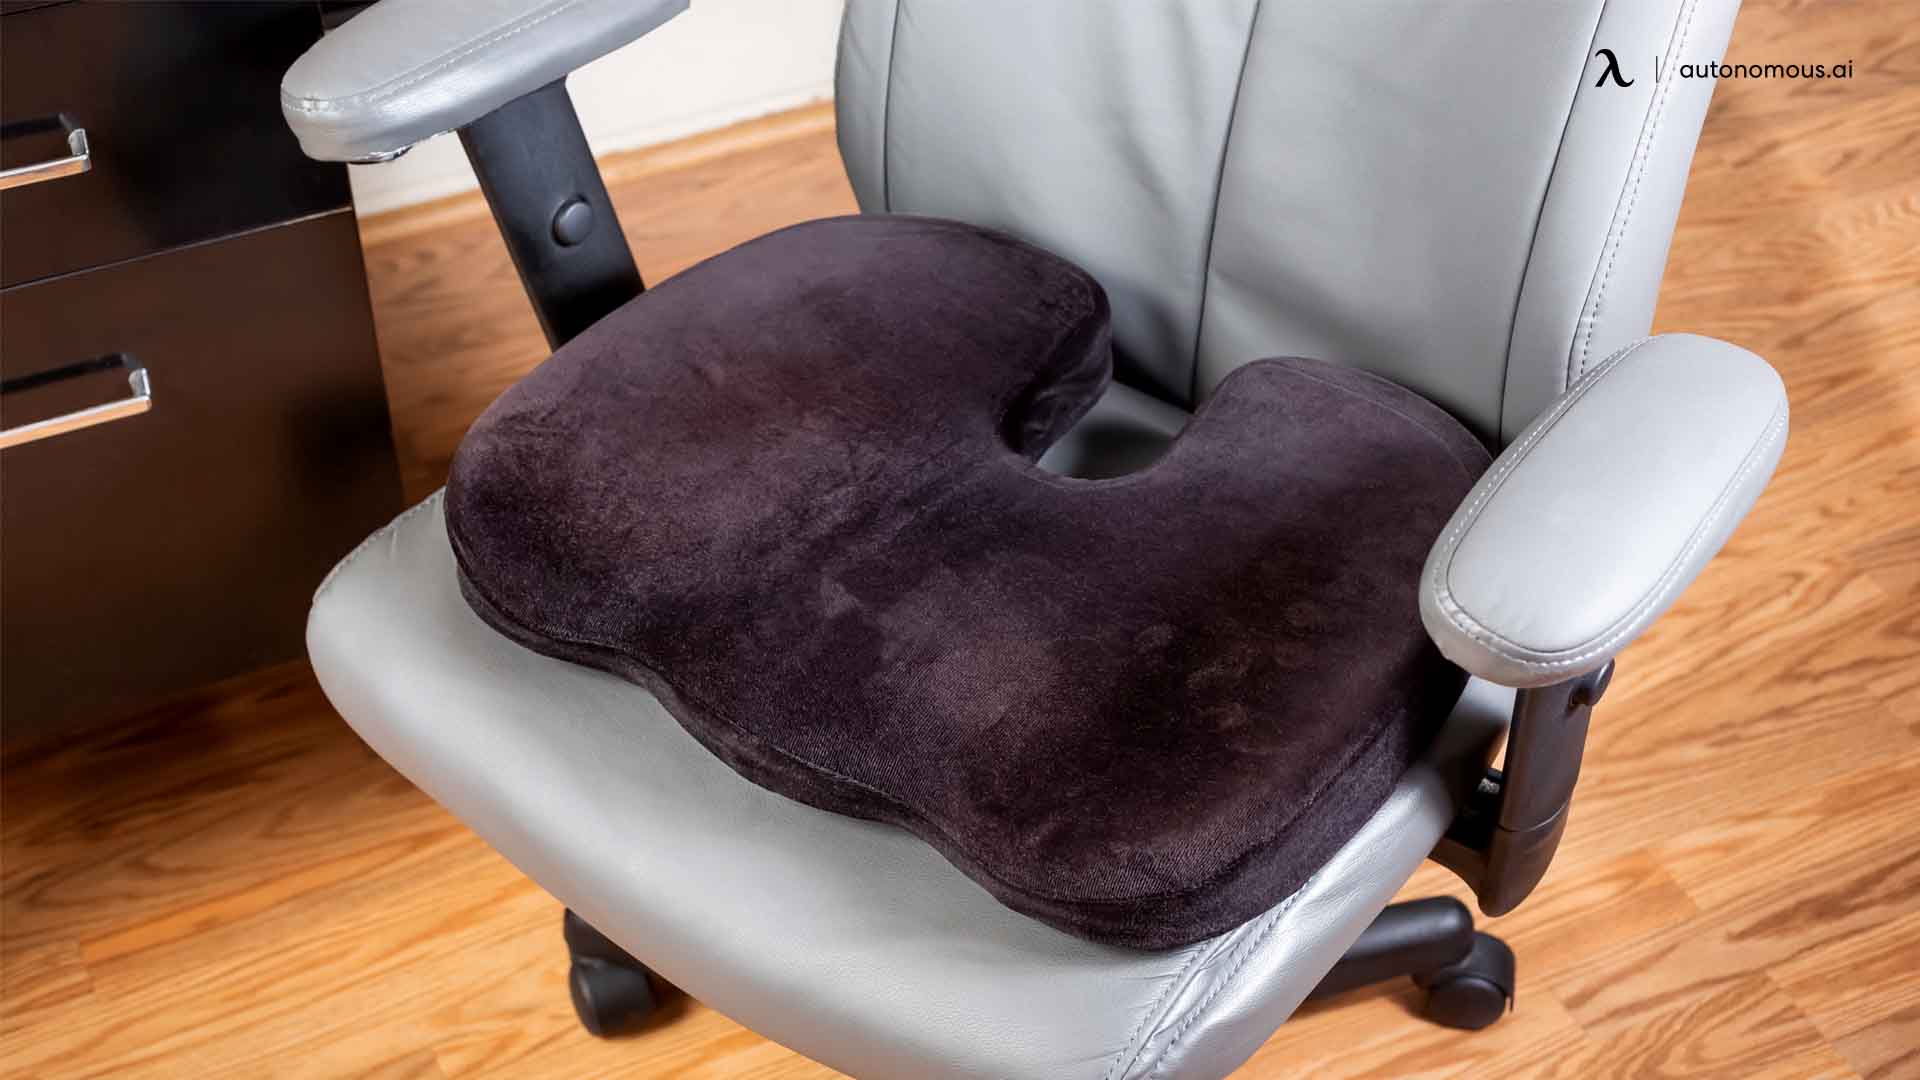 Top 3 Best Office Chair Back Support Pillows for 2022